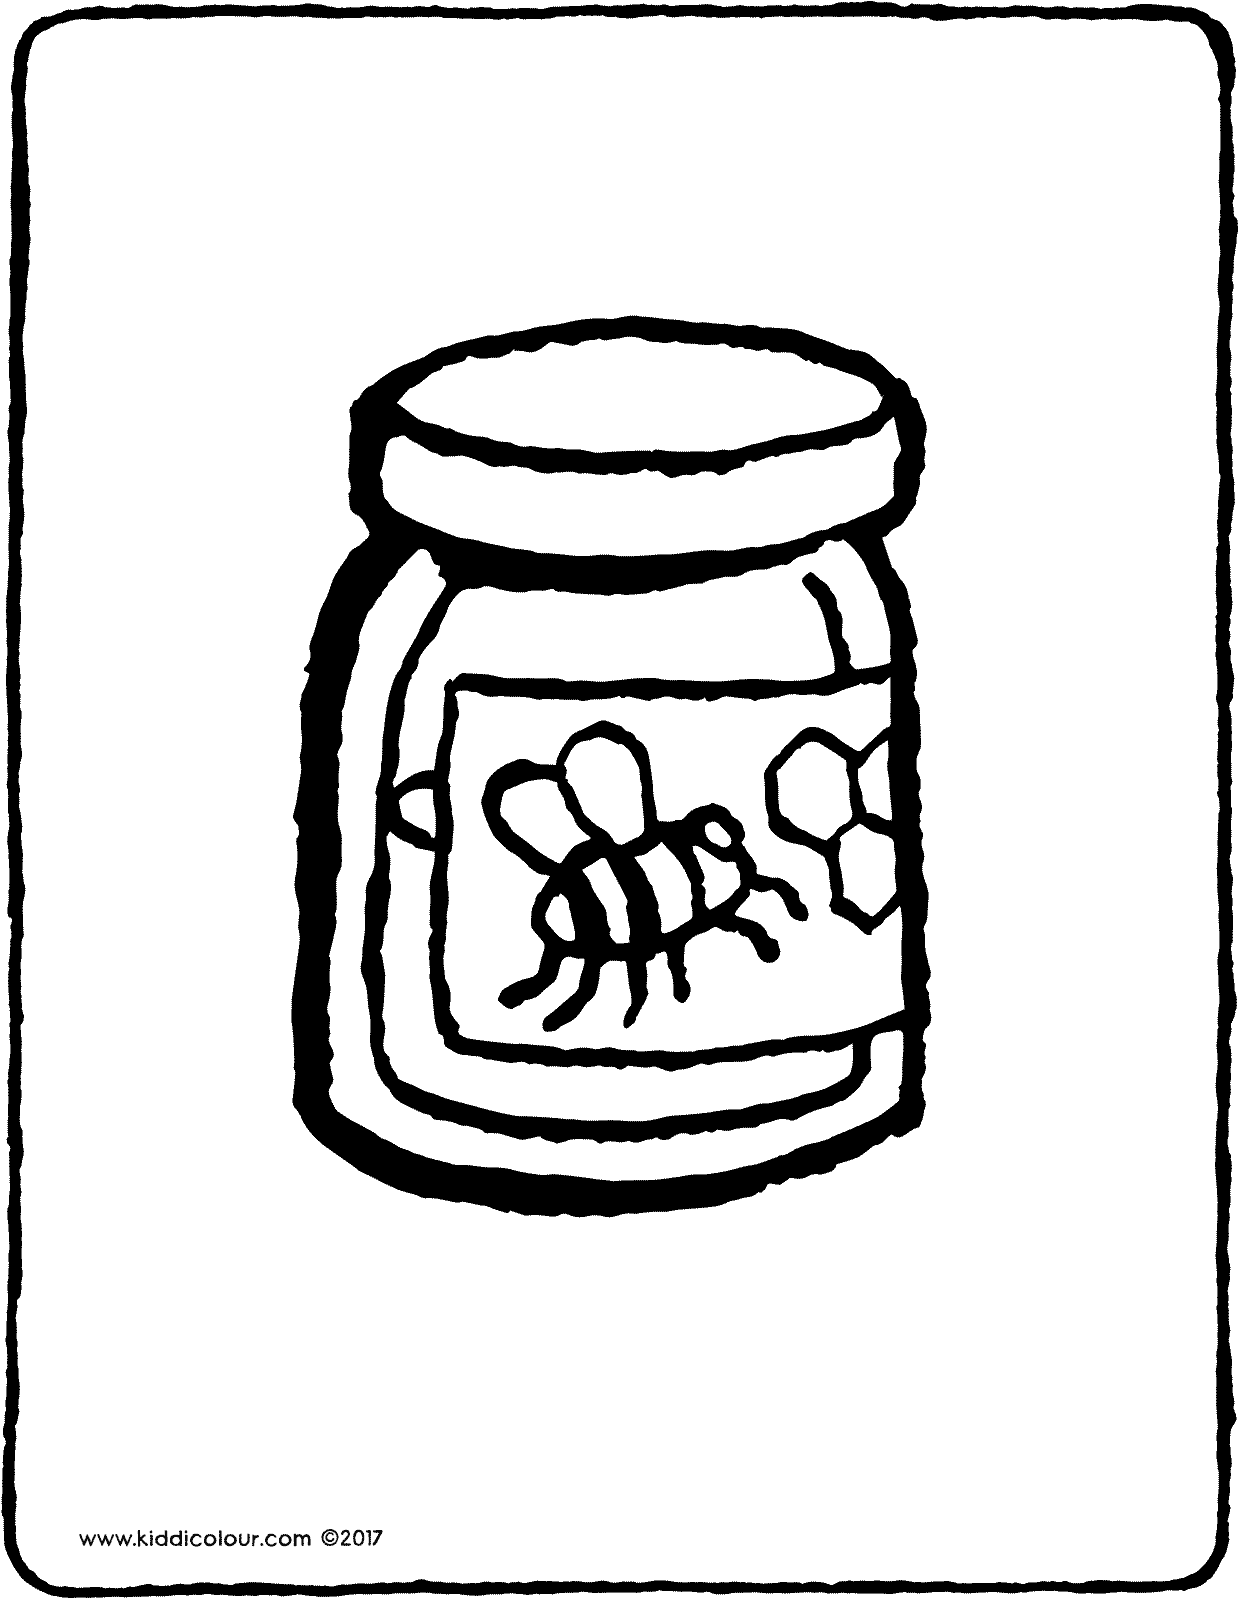 Honey Pot Coloring Page At Free Printable Colorings Pages To Print And Color 